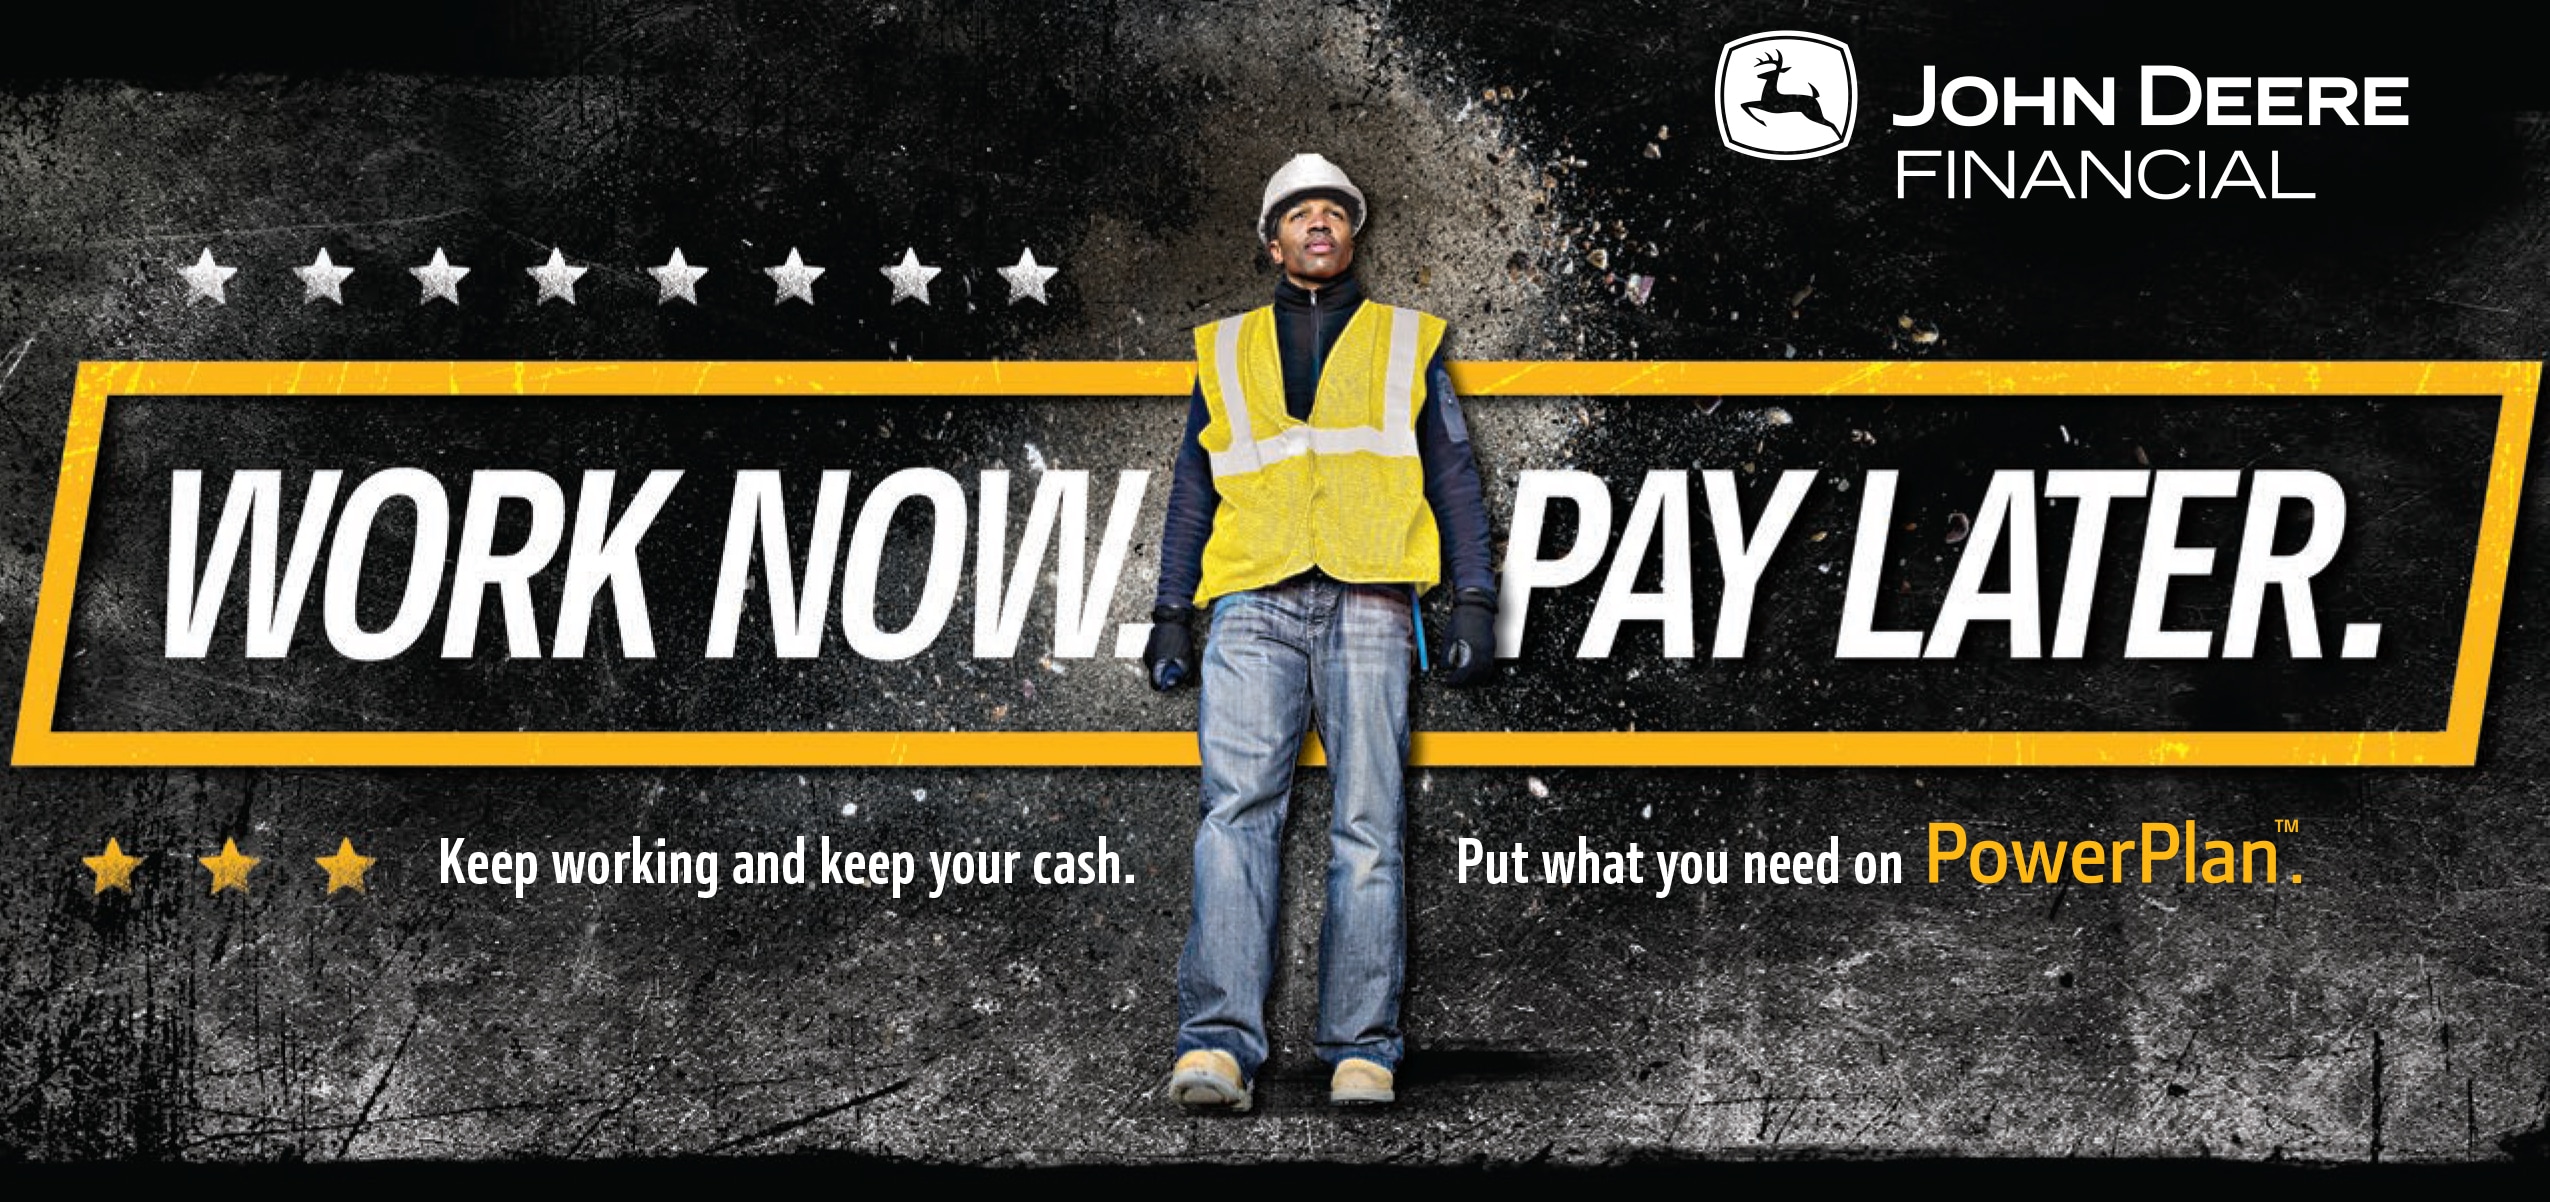 Technician walking overtop graphic of the PowerPlan™ tagline "Work Now. Pay Later." Beneath that, the image reads, "Keep working and keep your cash. Put what you need on PowerPlan™." In the corner, the image reads John Deere Financial next to the John Deere logo. 